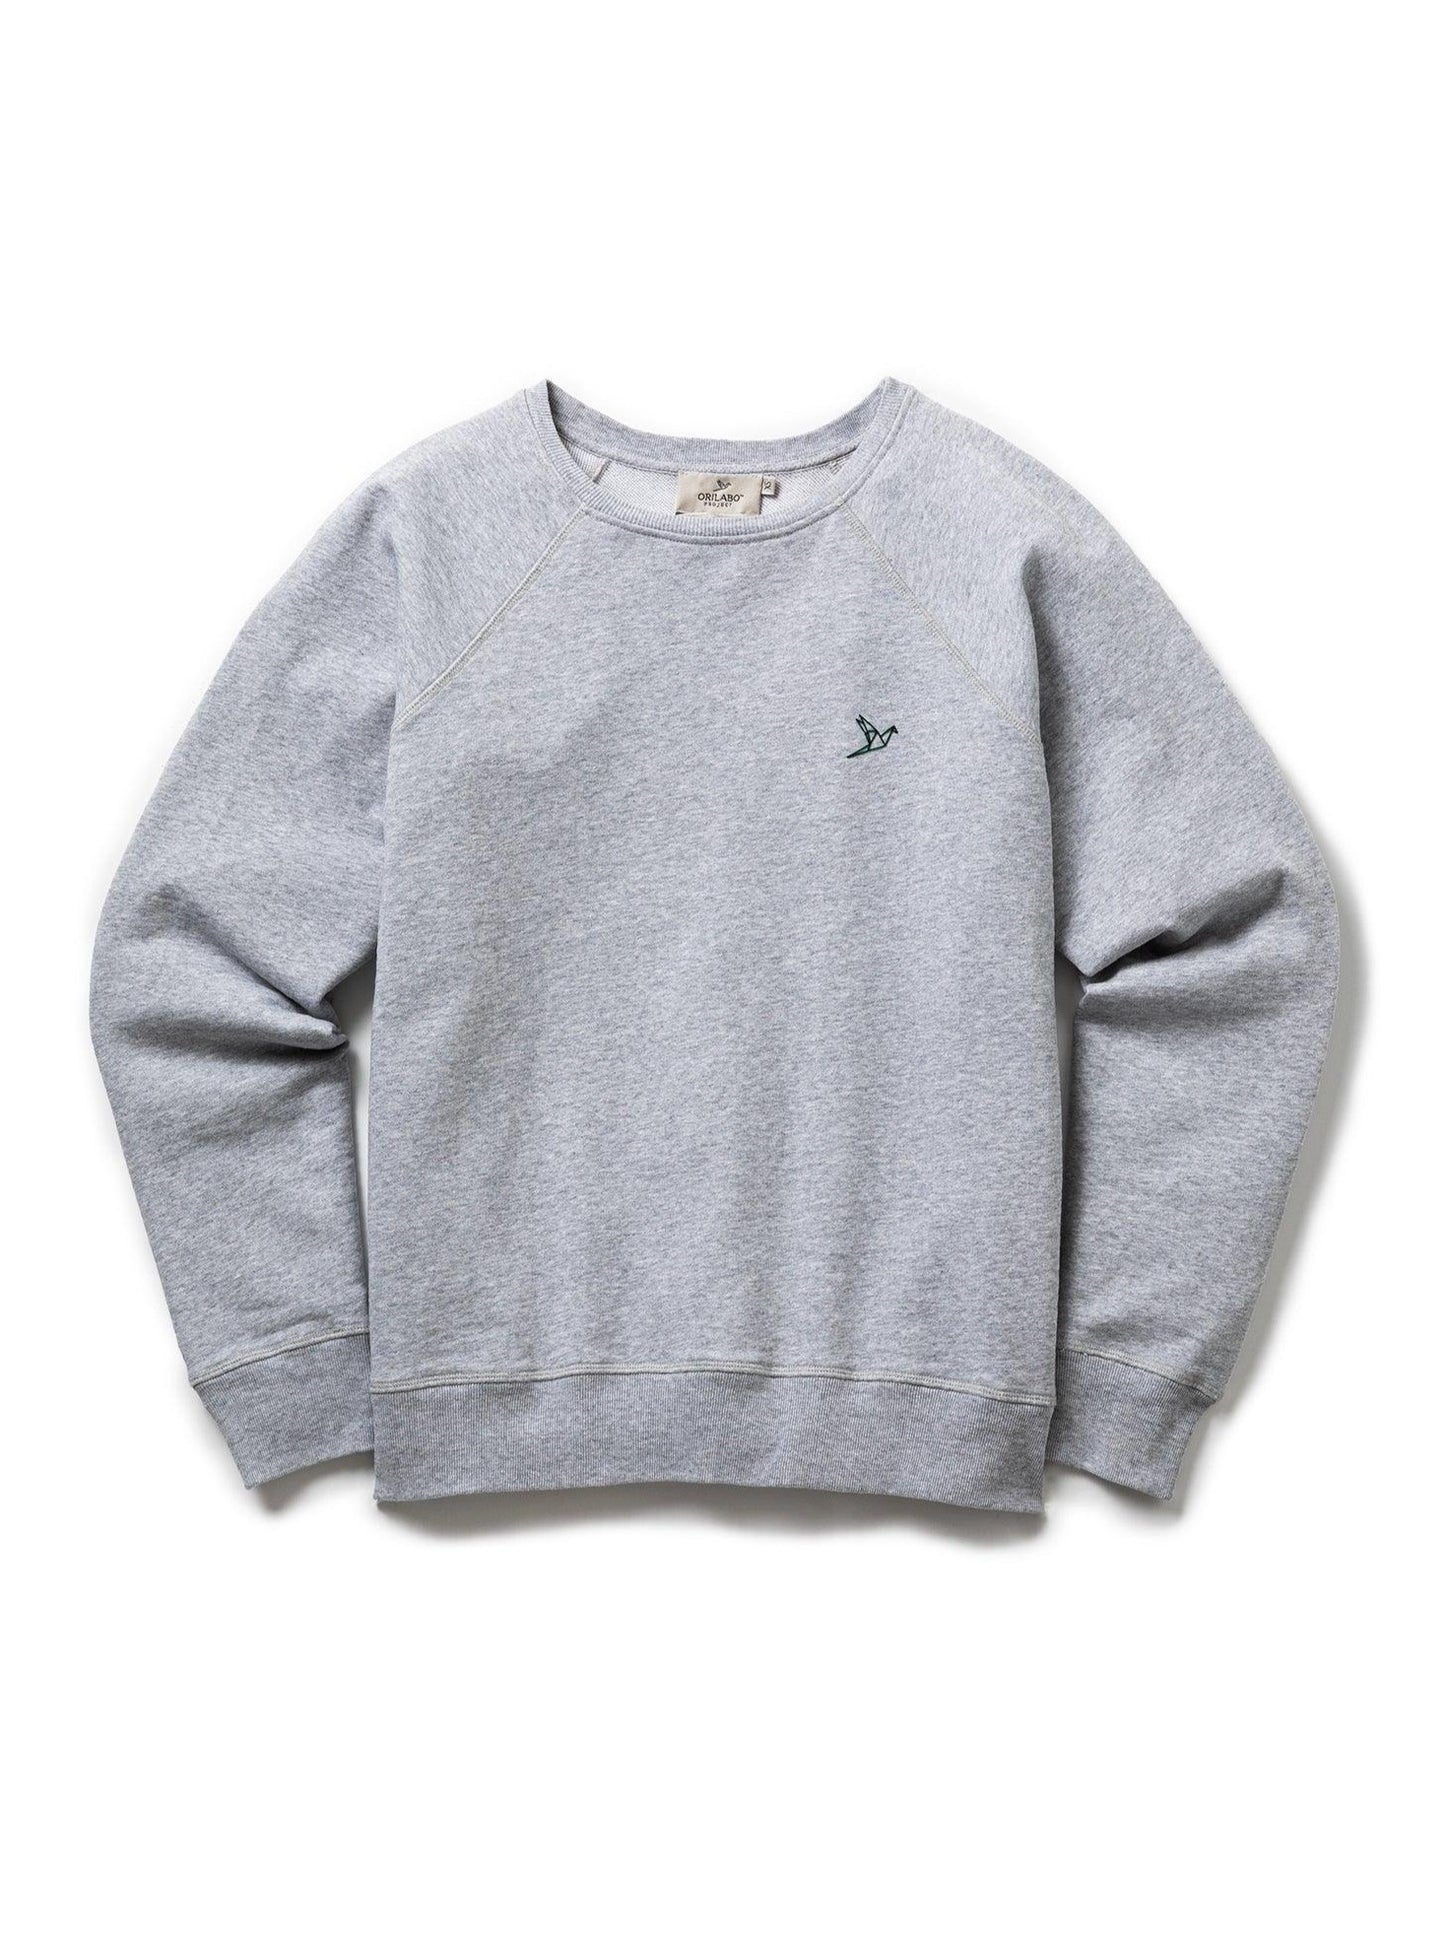 
                  
                    Women's O-Roses Terry Crewneck - Grey - ORILABO Project
                  
                